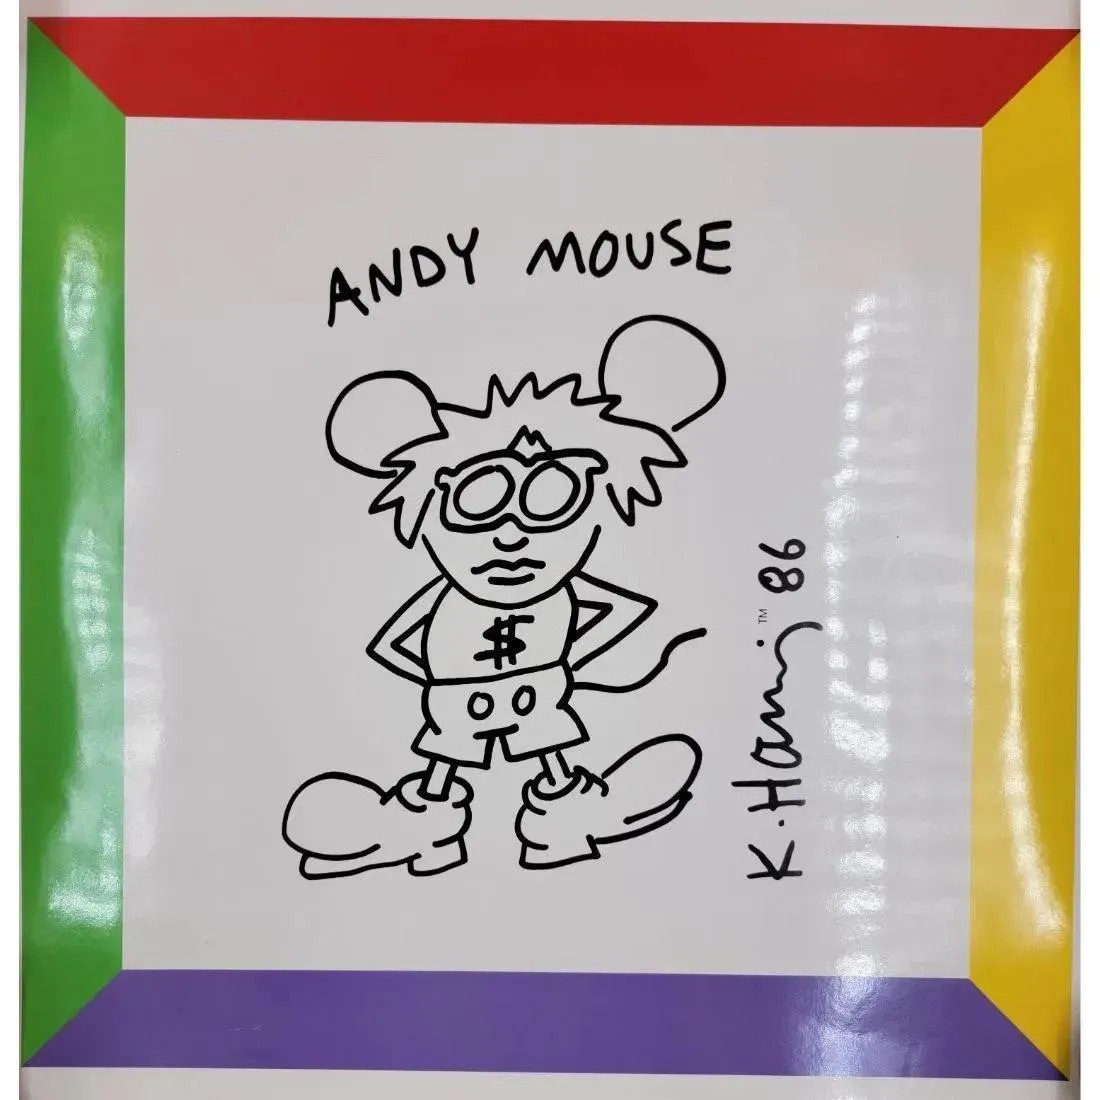 Andy Warhol "Andy Mouse" 1991 Offset Lithograph